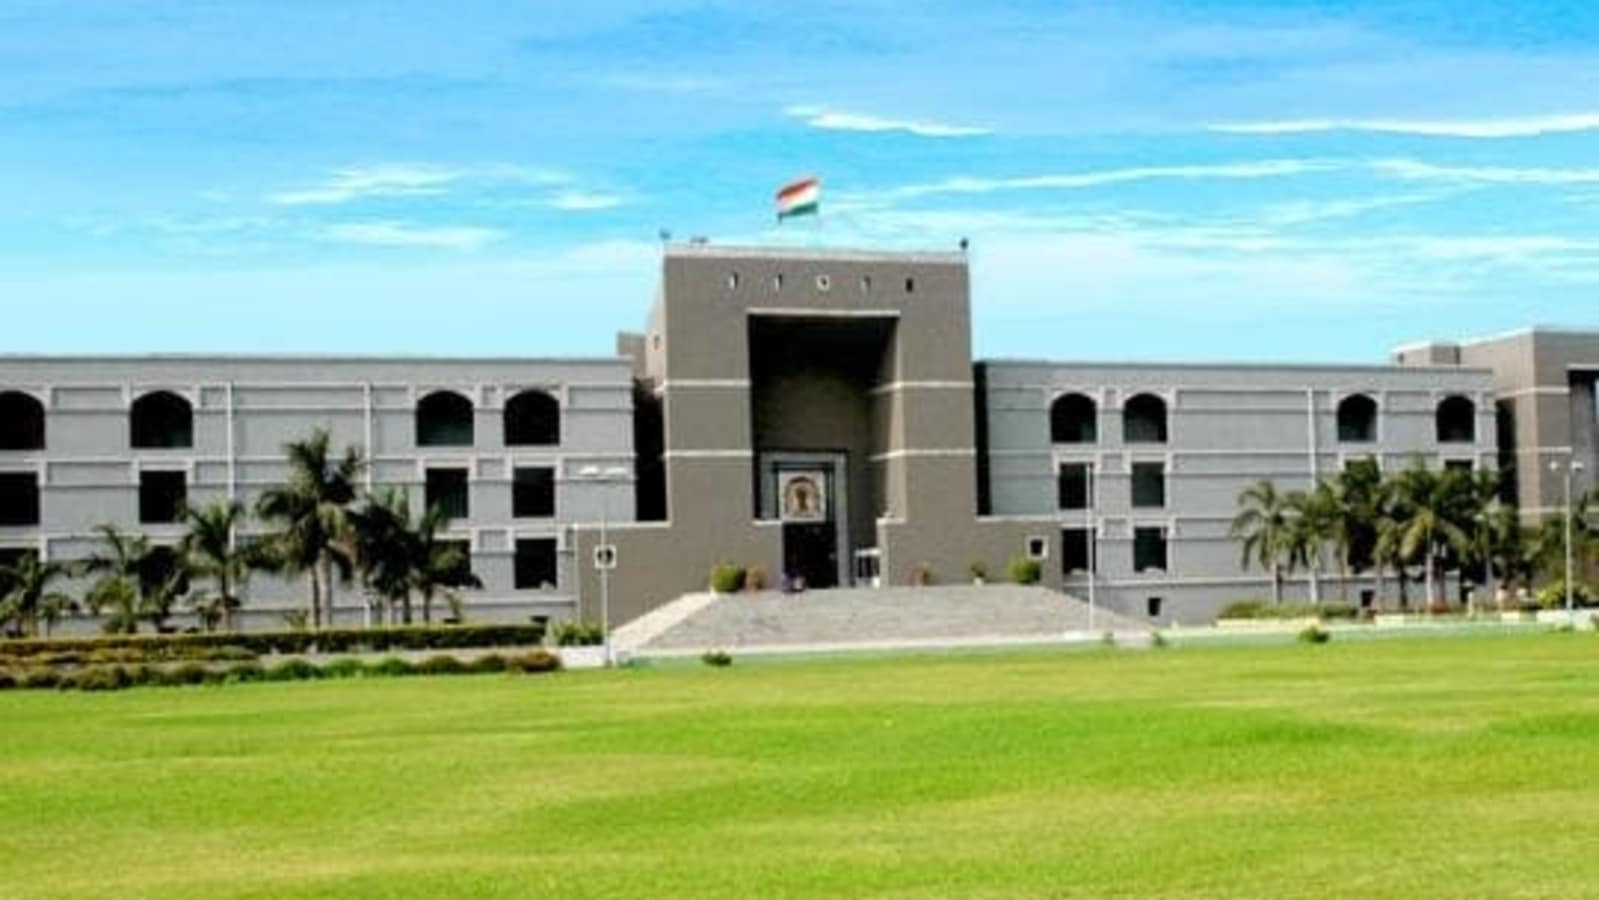 Couple moves Gujarat high court for 2-day-old child’s custody | Latest News India